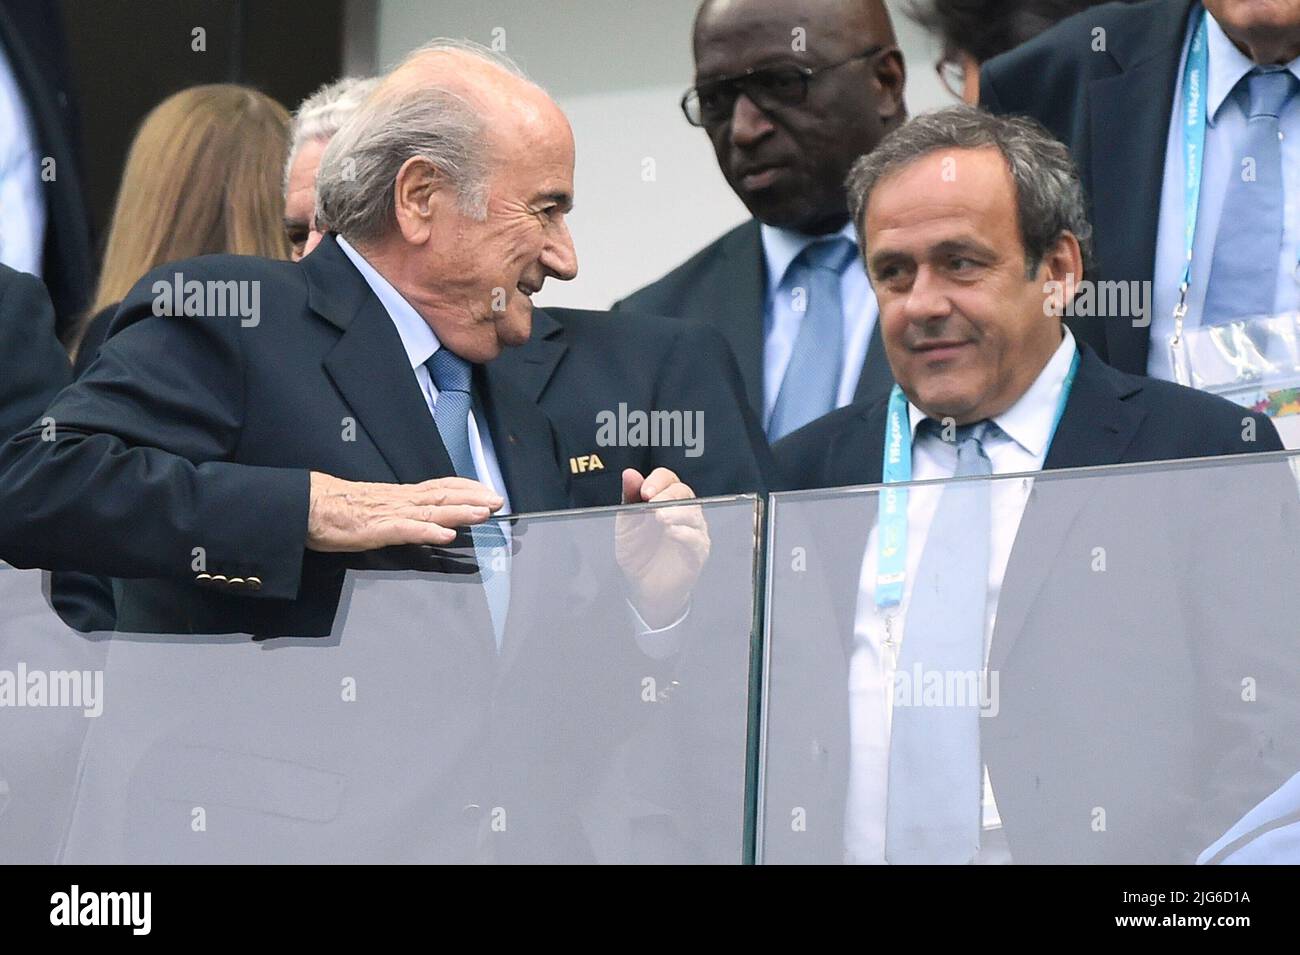 Sao Paulo. 9th July, 2014. ARCHIVE PHOTO; Acquittal for Sepp Blatter and Michael Platini in the trial for dubious payment of millions. From left:FIFA President Joseph Sepp BLATTER (SUI) with Uefa President Michel PLATINI (FRA) on the honorary stand. Netherlands (NED)-Argentina (ARG) 2-4 nE semi-finals, semi-finals, 4th round, game 62, on July 9th, 2014 in Sao Paulo. Soccer World Cup 2014 in Brazil from 12.06. - 07/13/2014. Â Credit: dpa/Alamy Live News Stock Photo